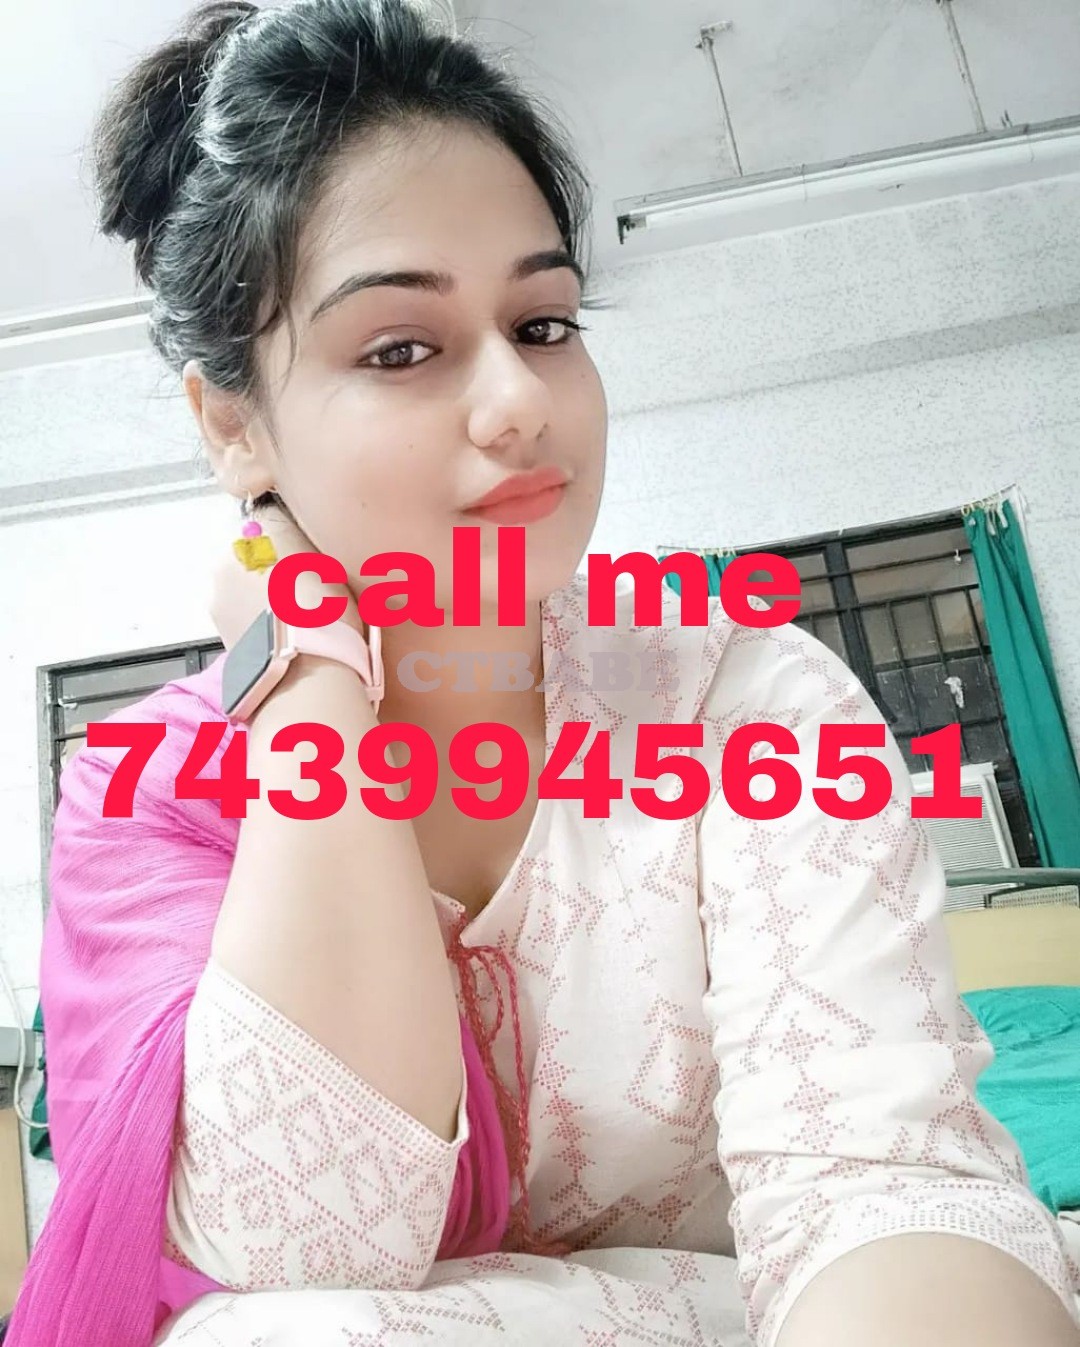 BAGA BEACH CALL GIRL 74399*45651 LOW PRICE FULL SAFE AND SECURE SERVICE AVAILABL